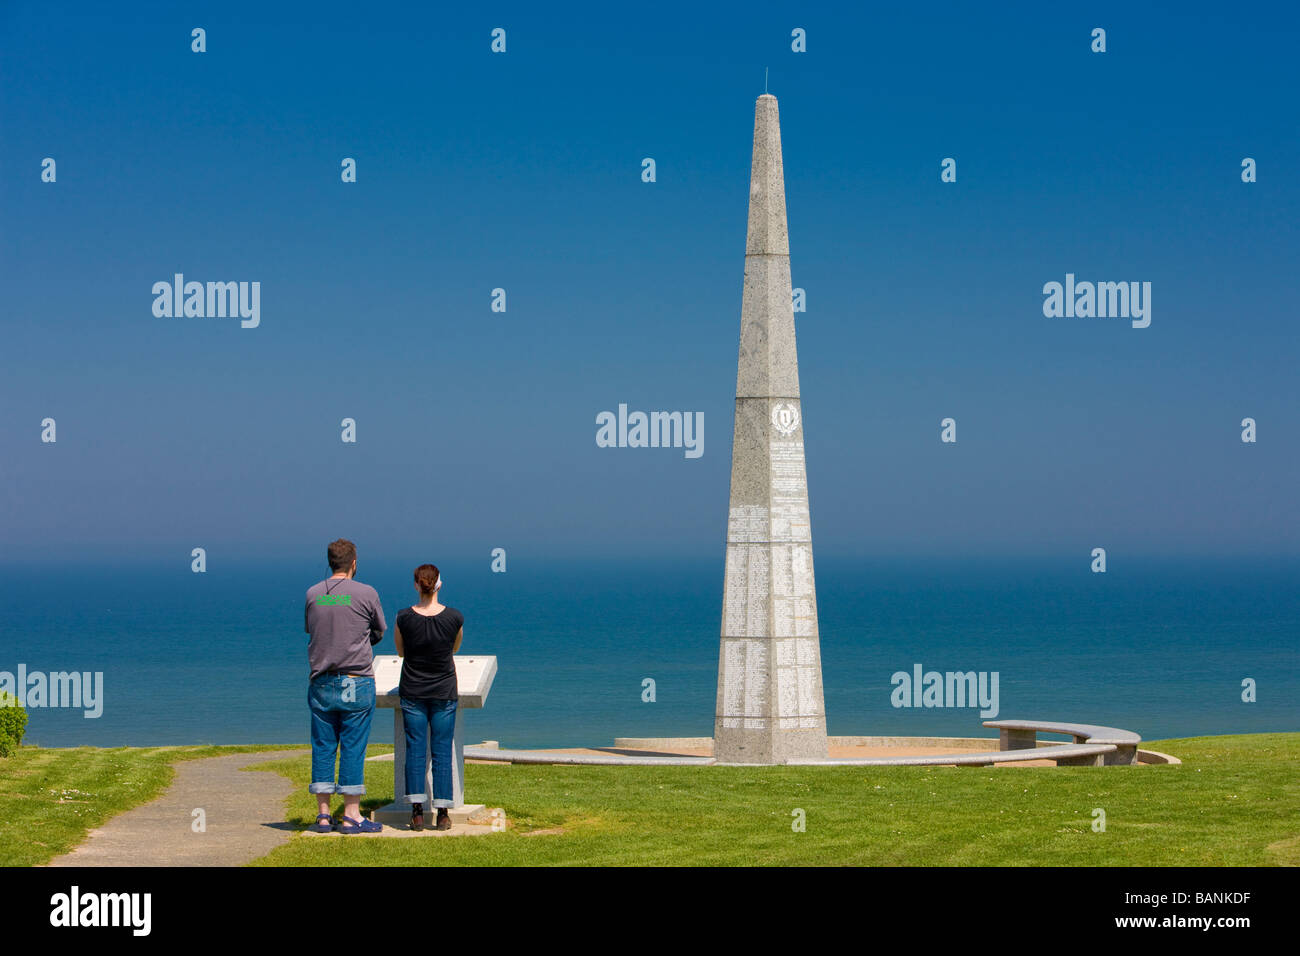 The 1st infantry division monument near Omaha Beach Normandy France Stock Photo